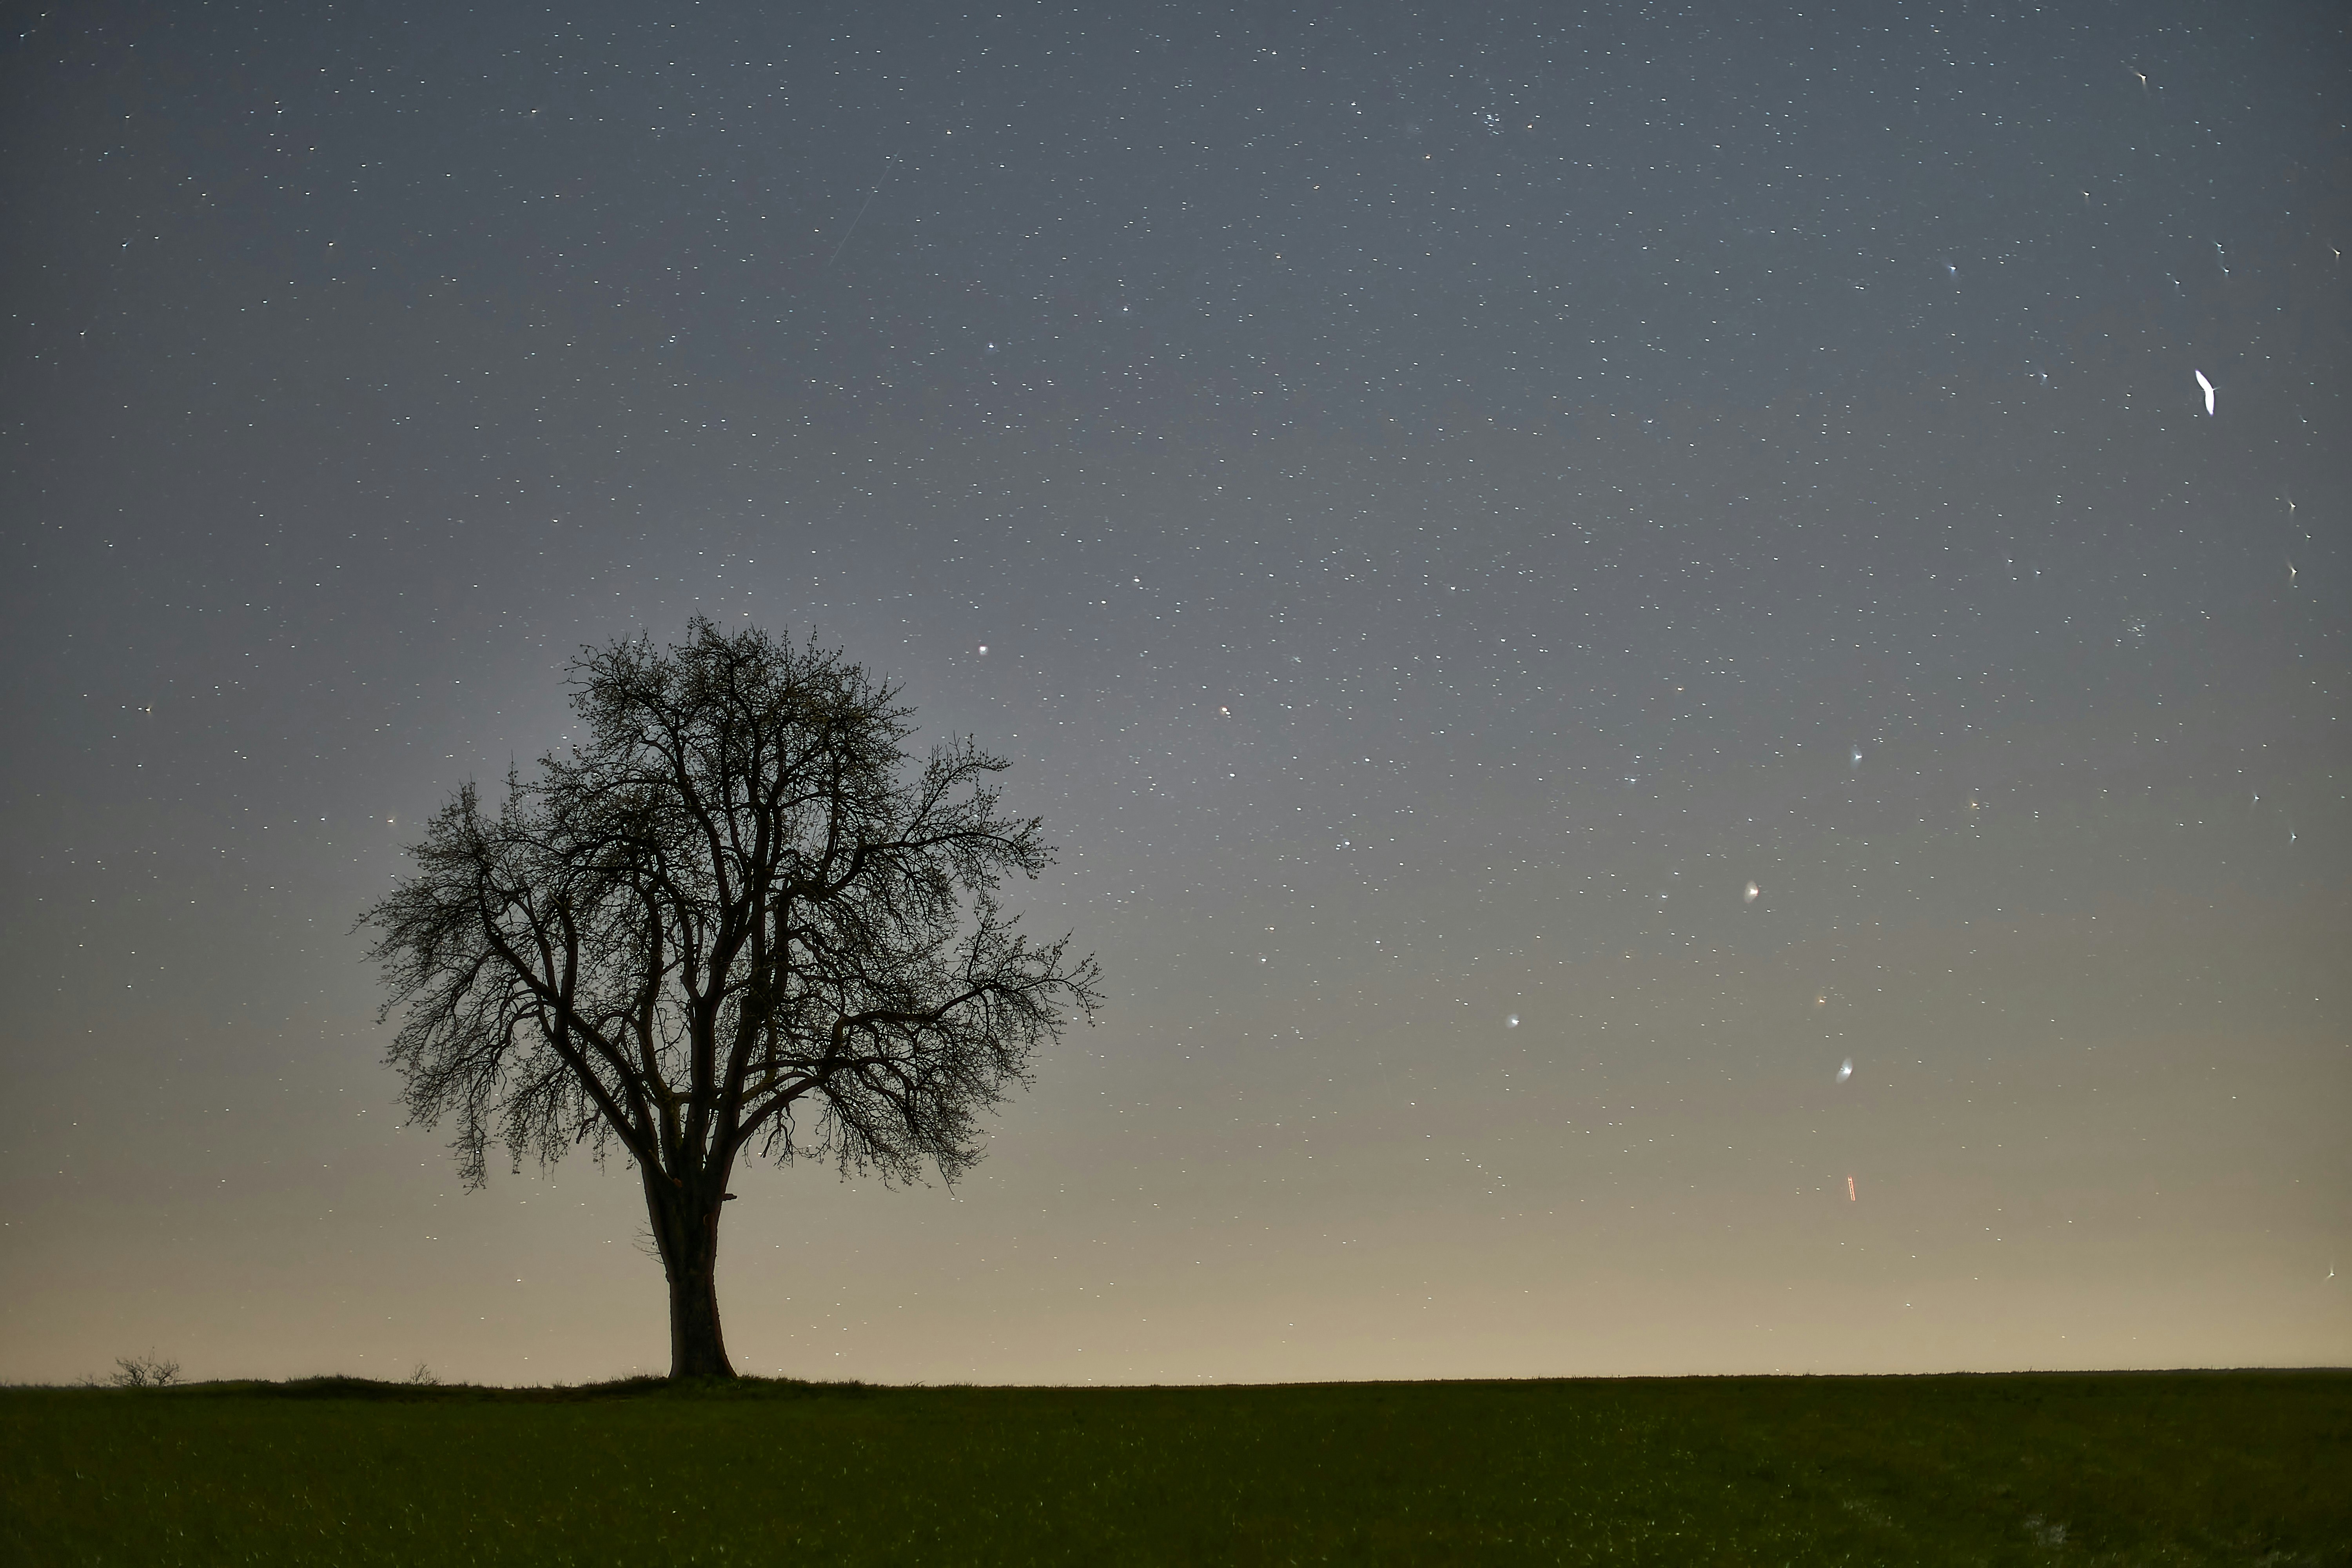 bare tree on green grass field under blue sky during night time